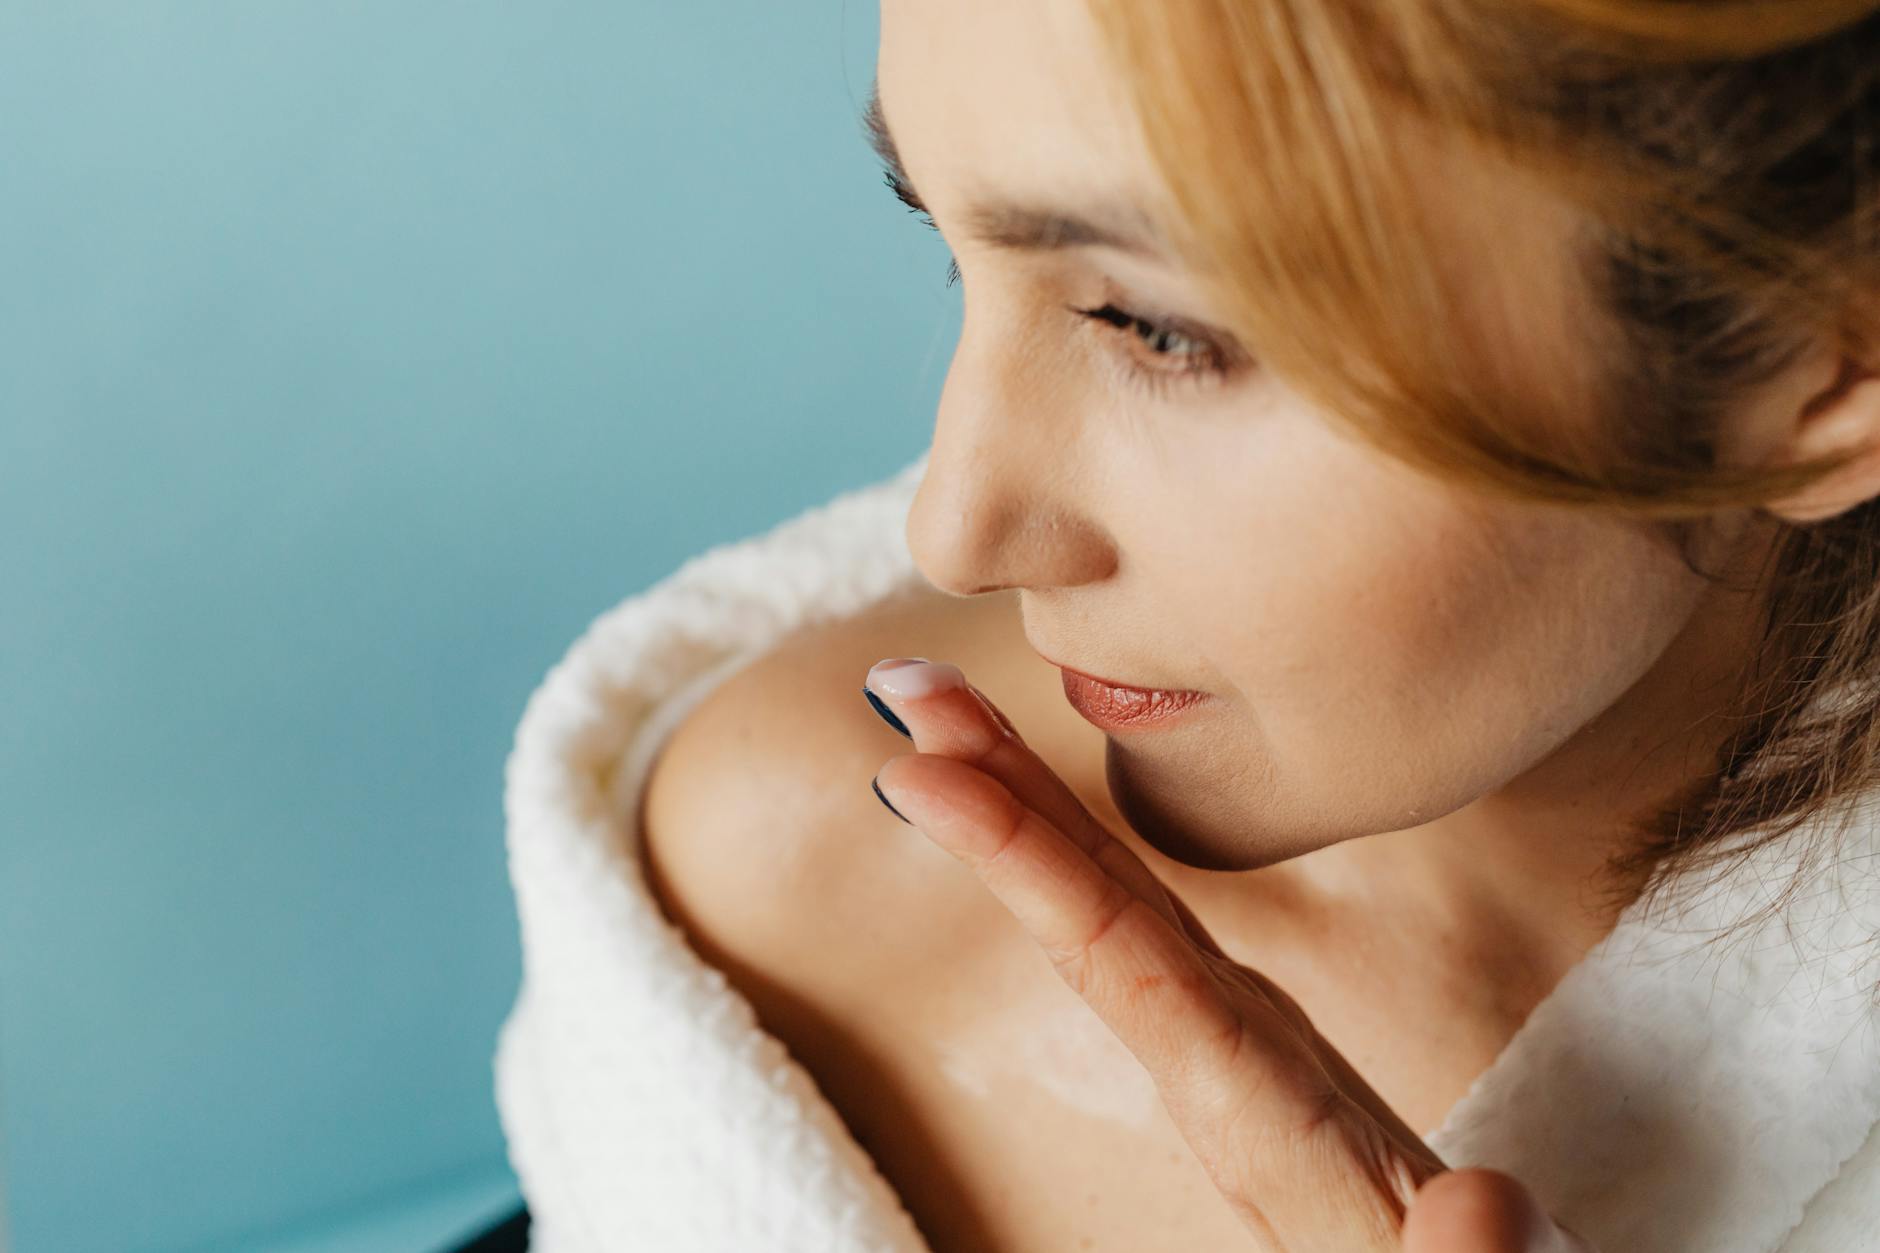 Close-up of Woman Smelling a Cream on Her Fingers